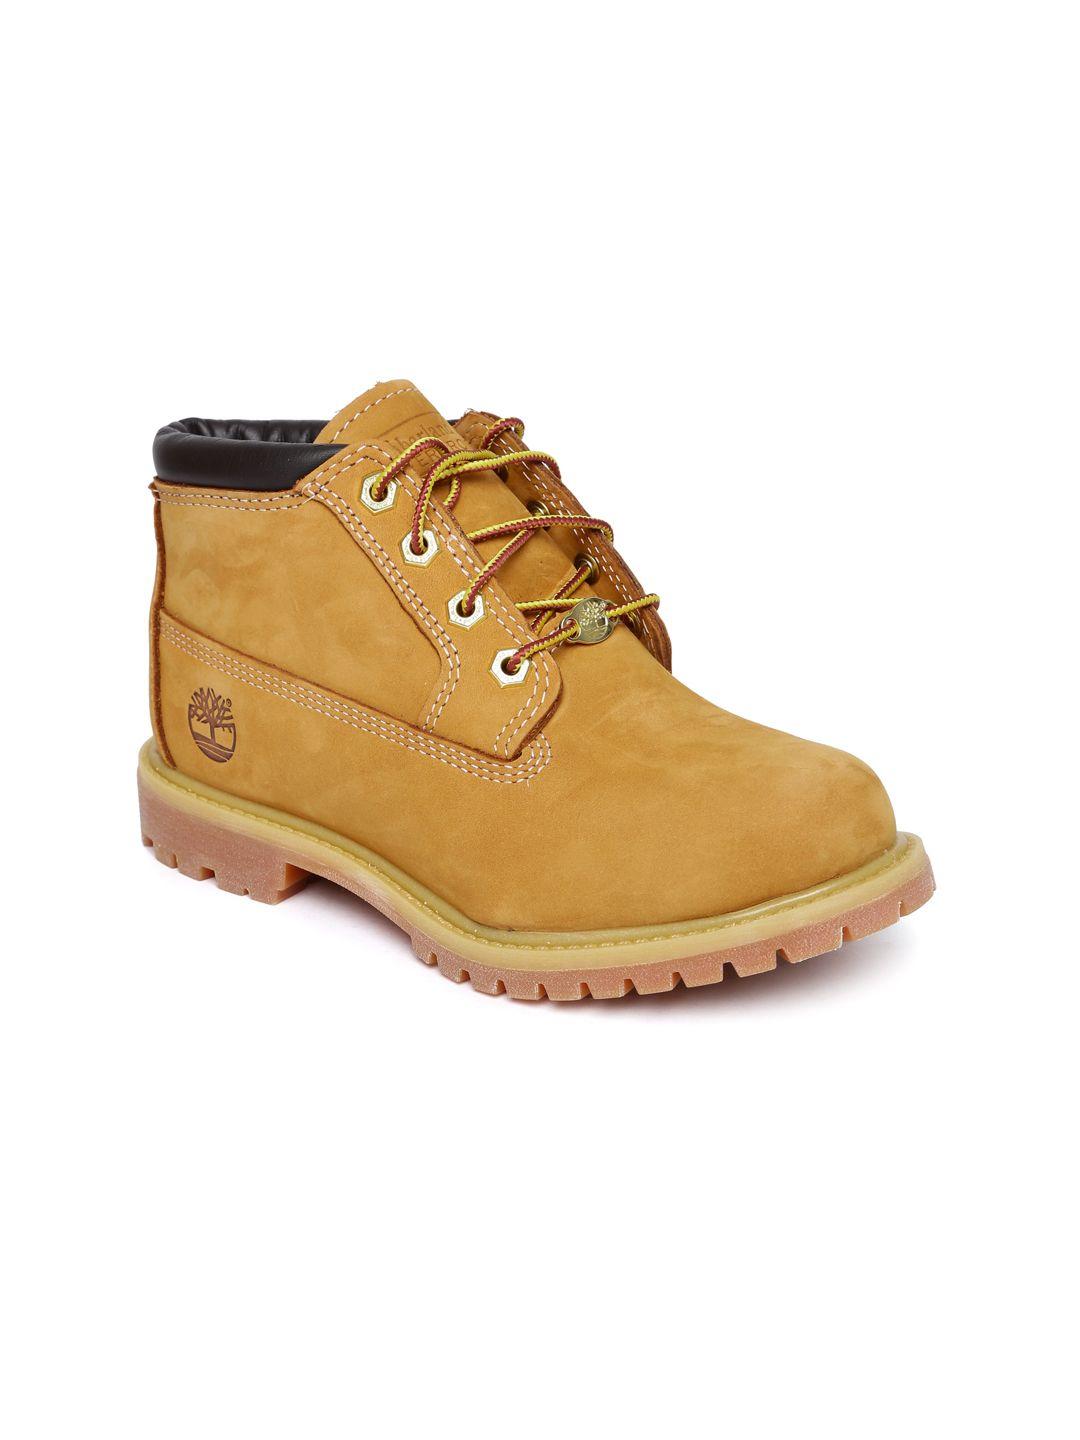 timberland-women-tan-solid-leather-mid-top-nellie-flat-boots